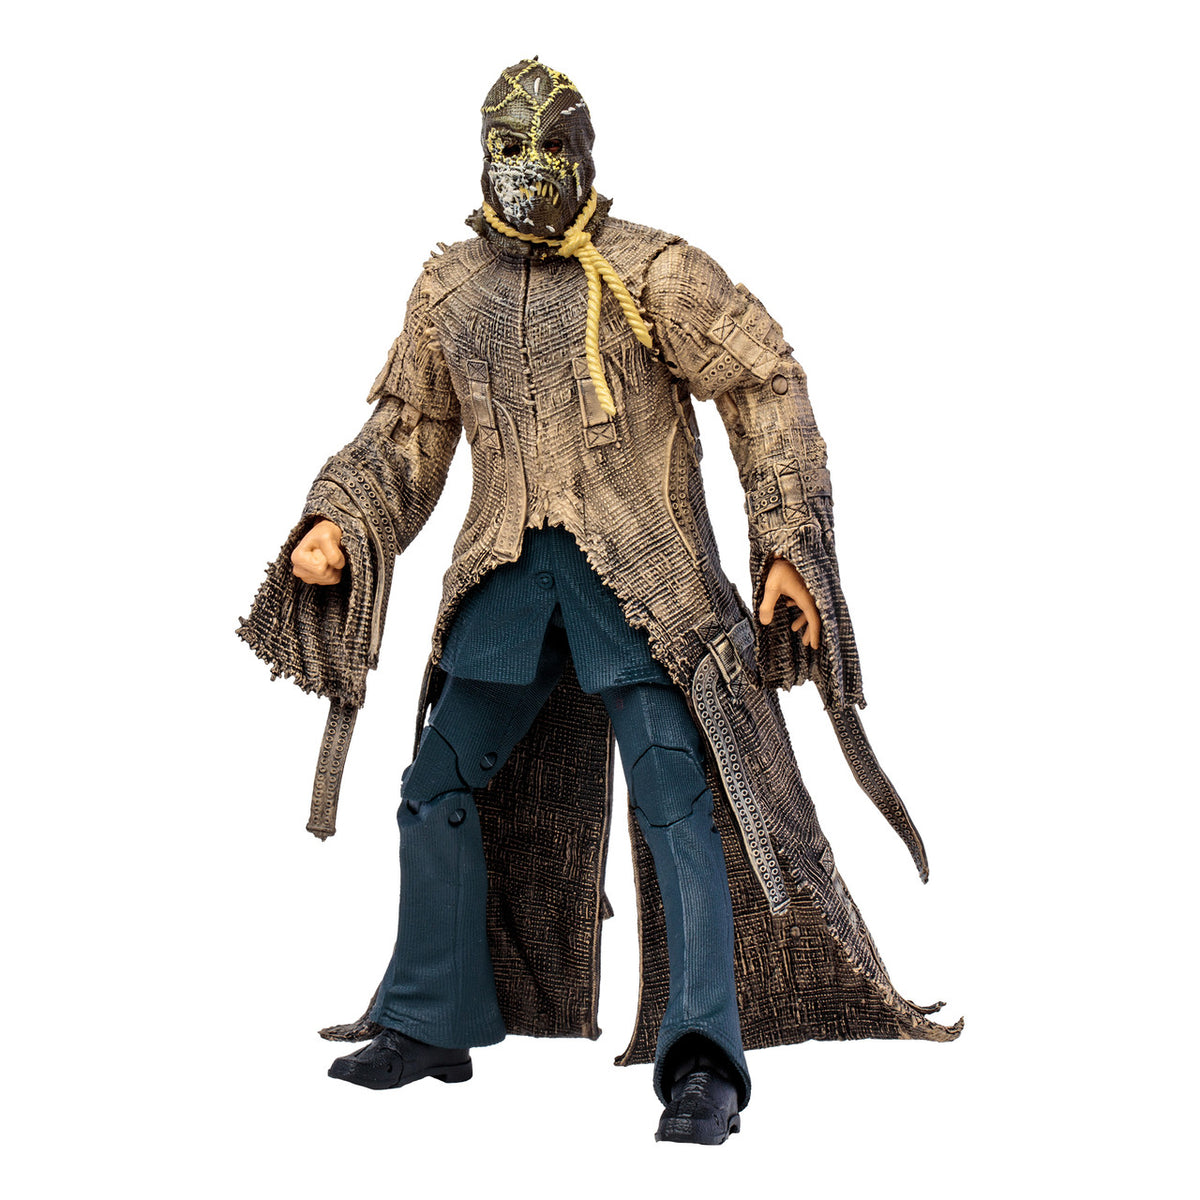 Scarecrow (The Dark Knight Trilogy) 7&quot; Build-A-Figure Bane Series Action Figure by McFarlane Toys -McFarlane Toys - India - www.superherotoystore.com